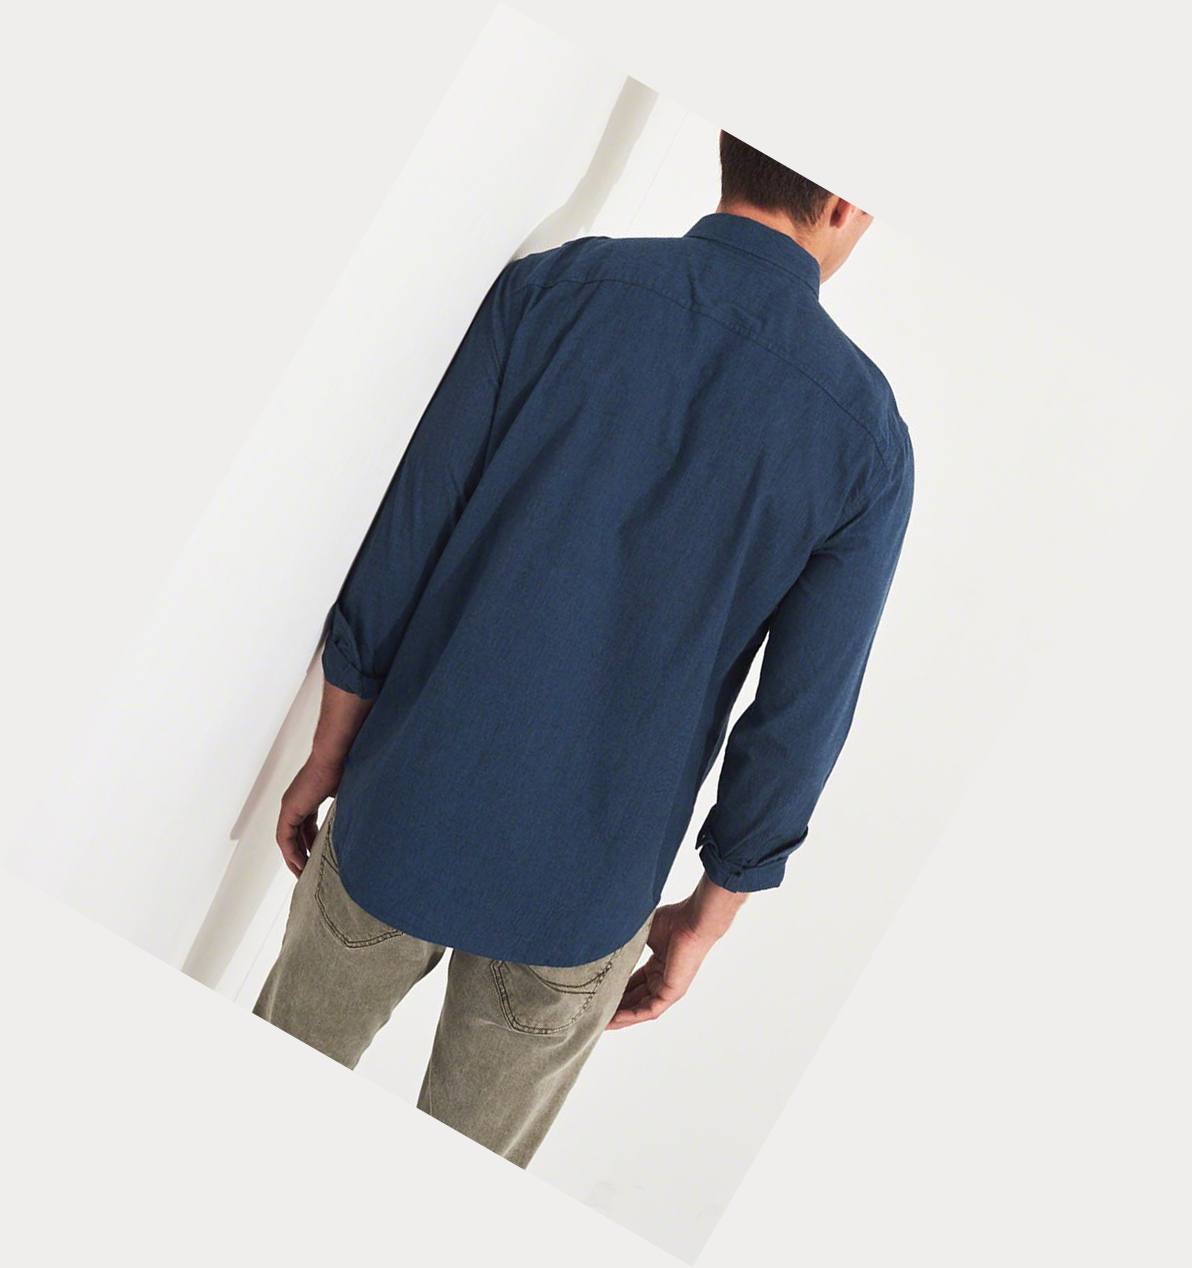 Hollister Long Sleeve for Men sale - discounted price